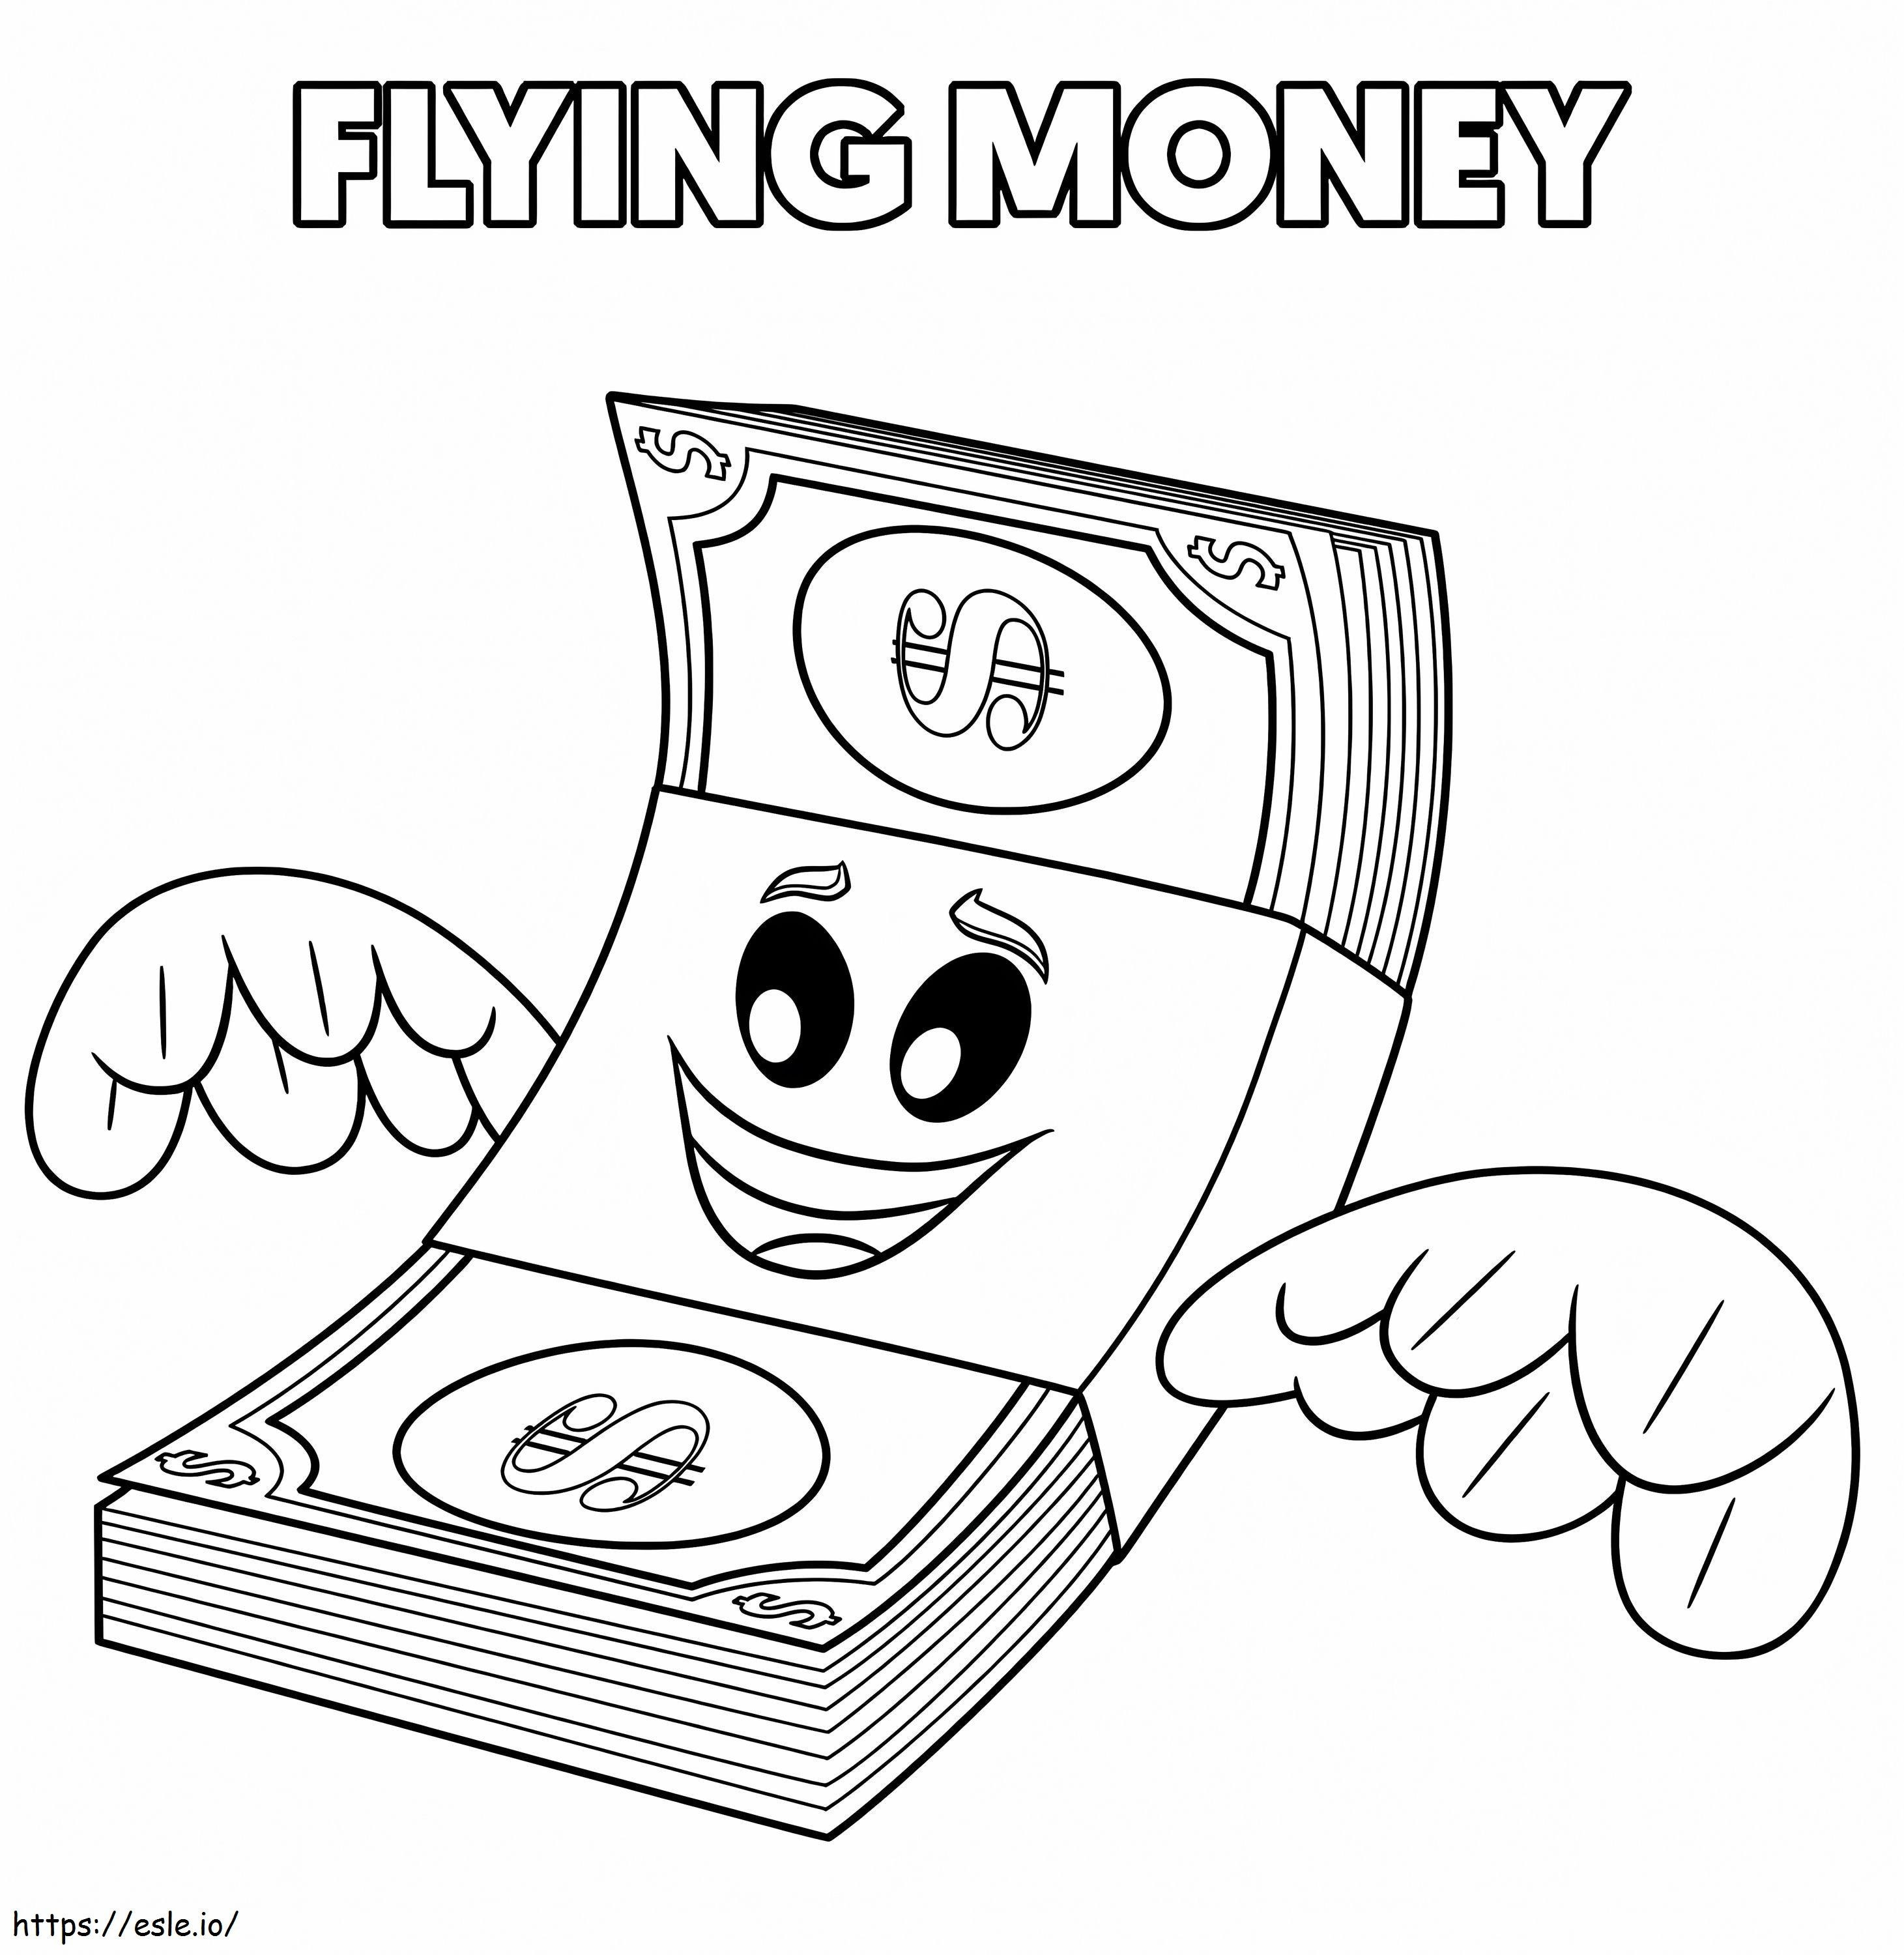 Flying Money From The Emoji Movie coloring page